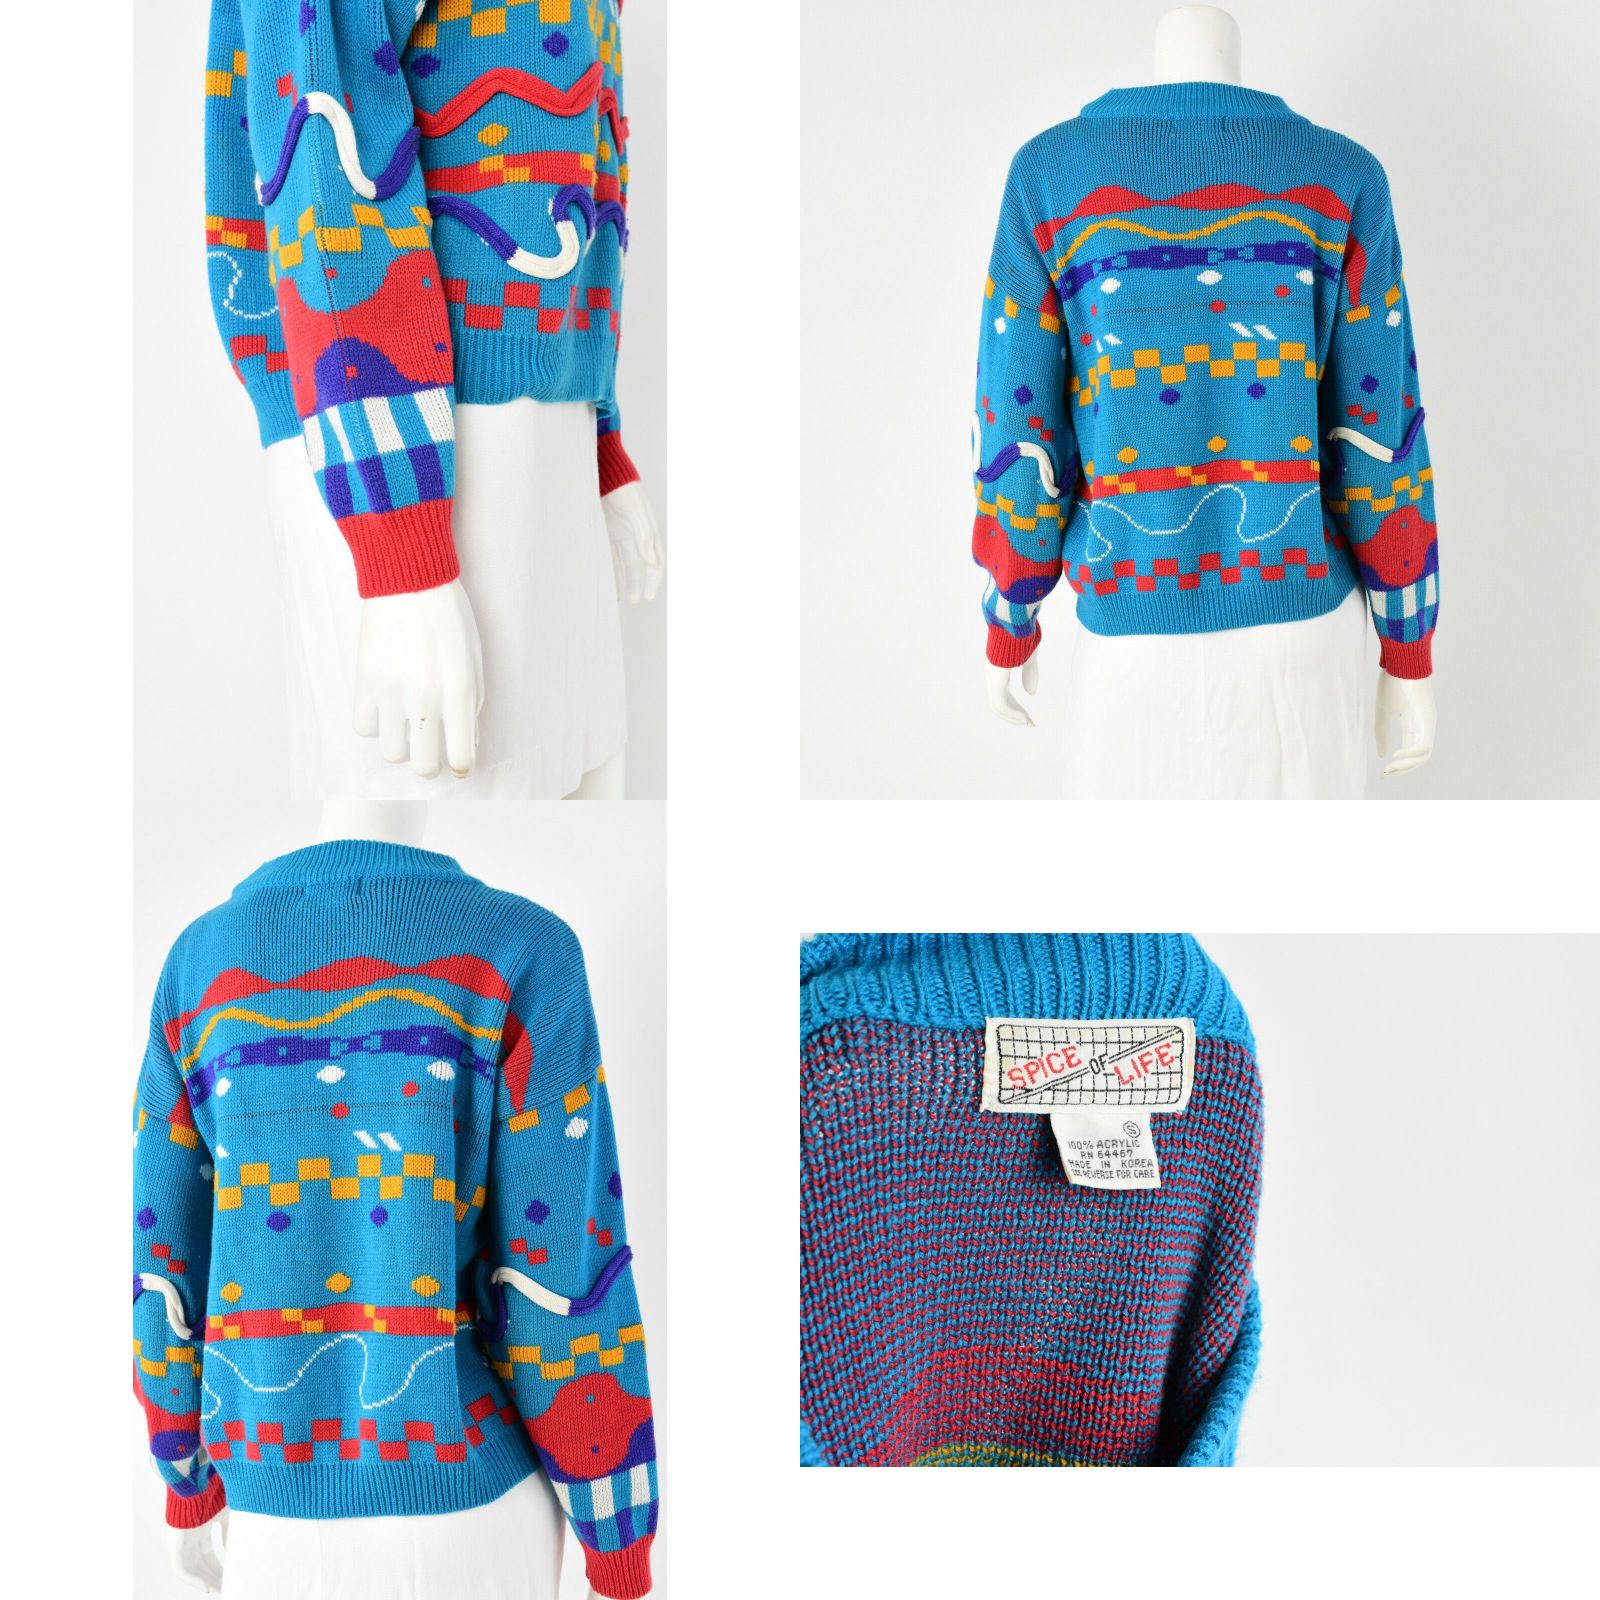 Vintage 90s Vintage Novelty Sweater Geometric Artsy Colorful Womens M Oversized Hip Hop Size M / US 6-8 / IT 42-44 - 4 Preview